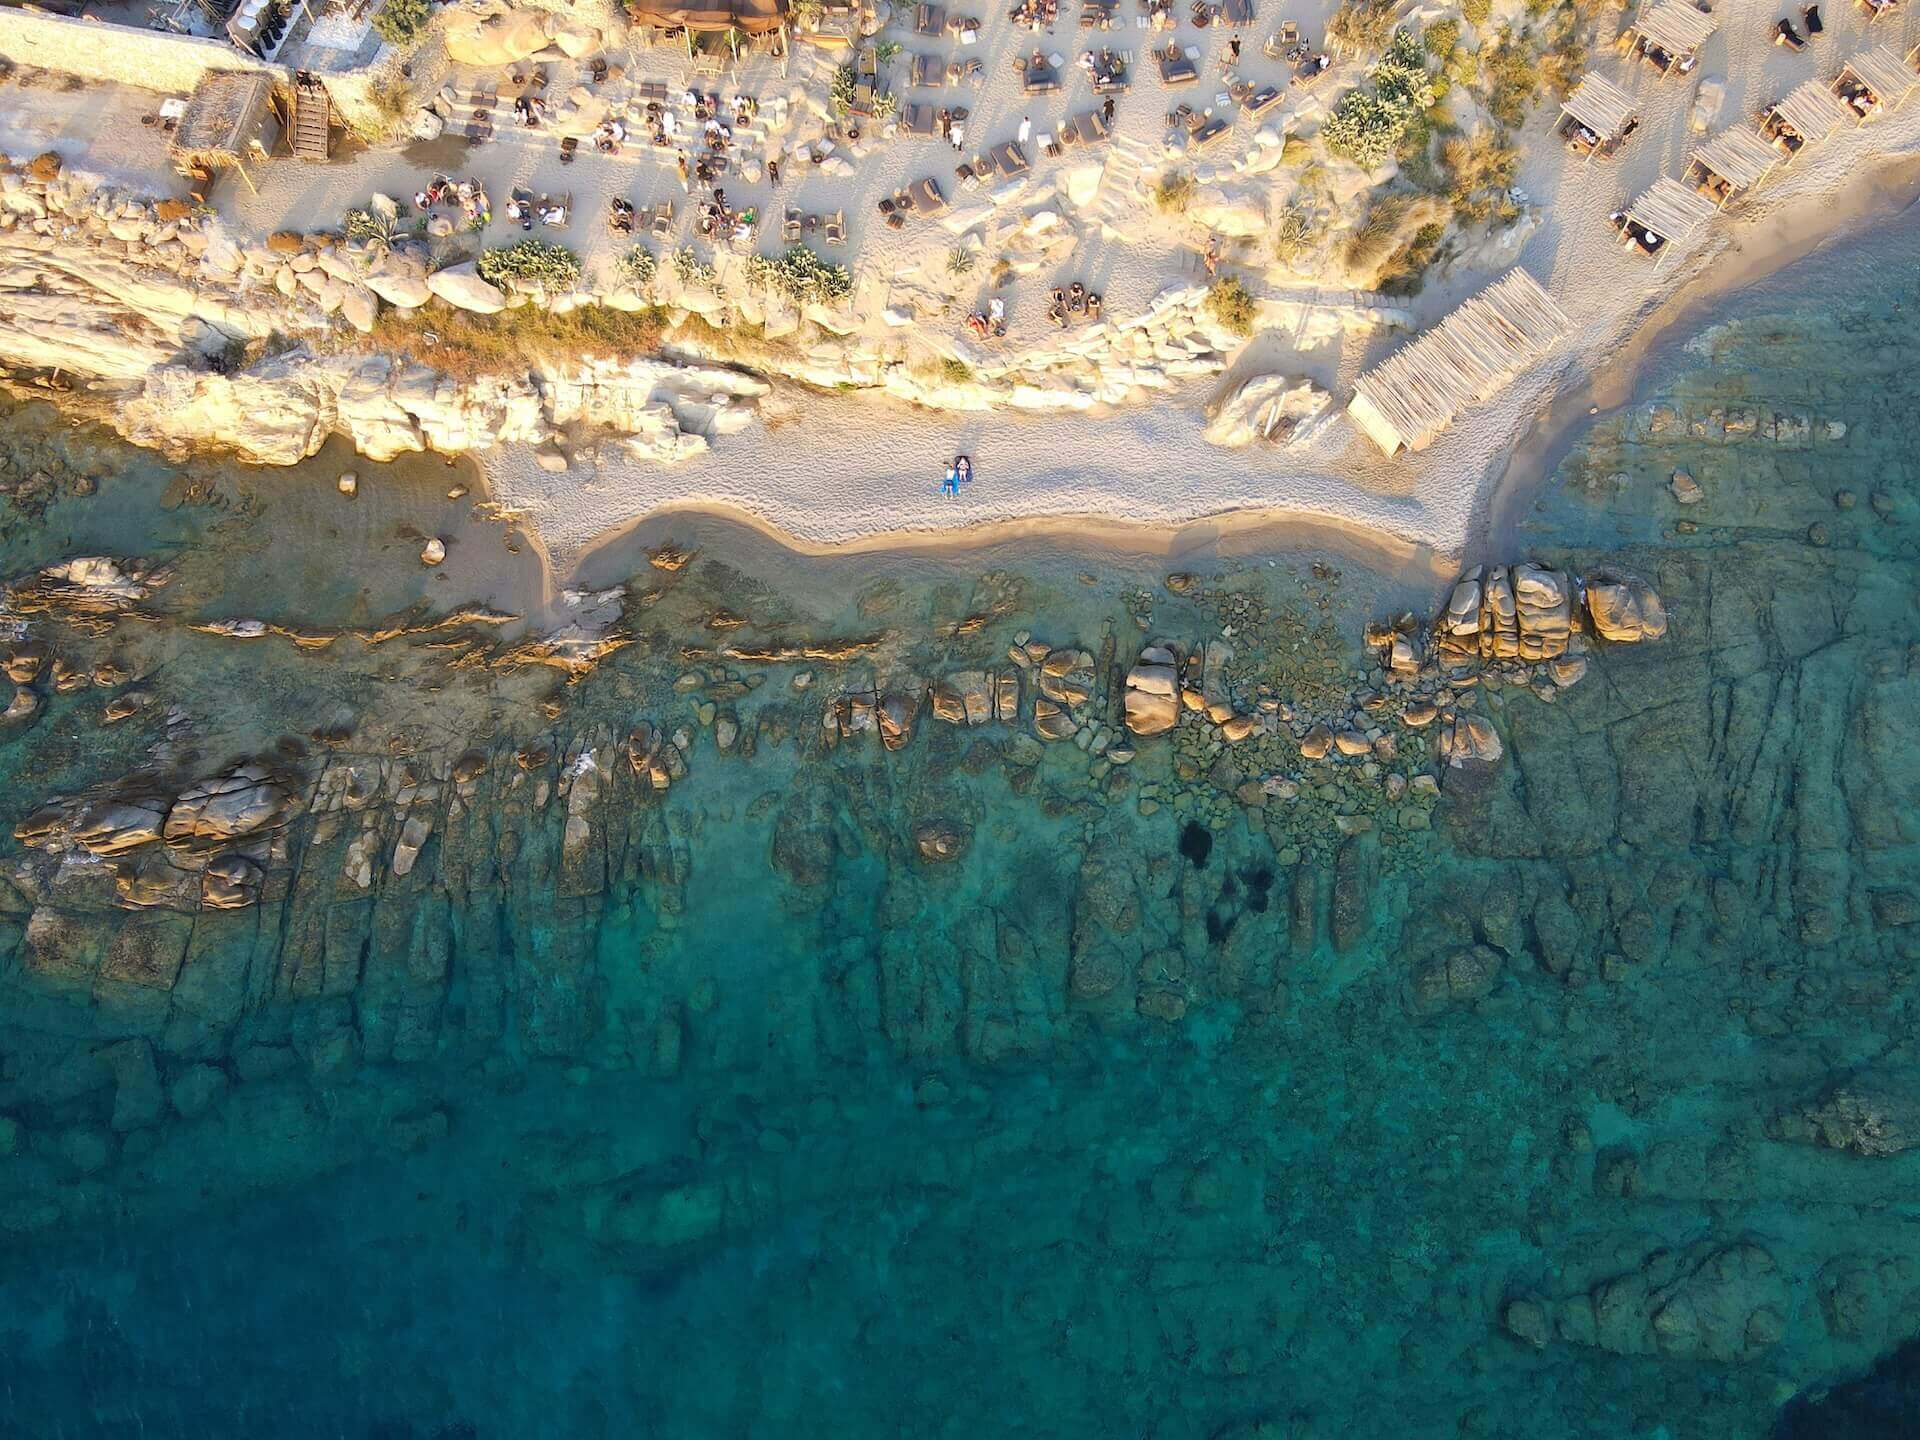 View of Scorpios in Mykonos taken from the air